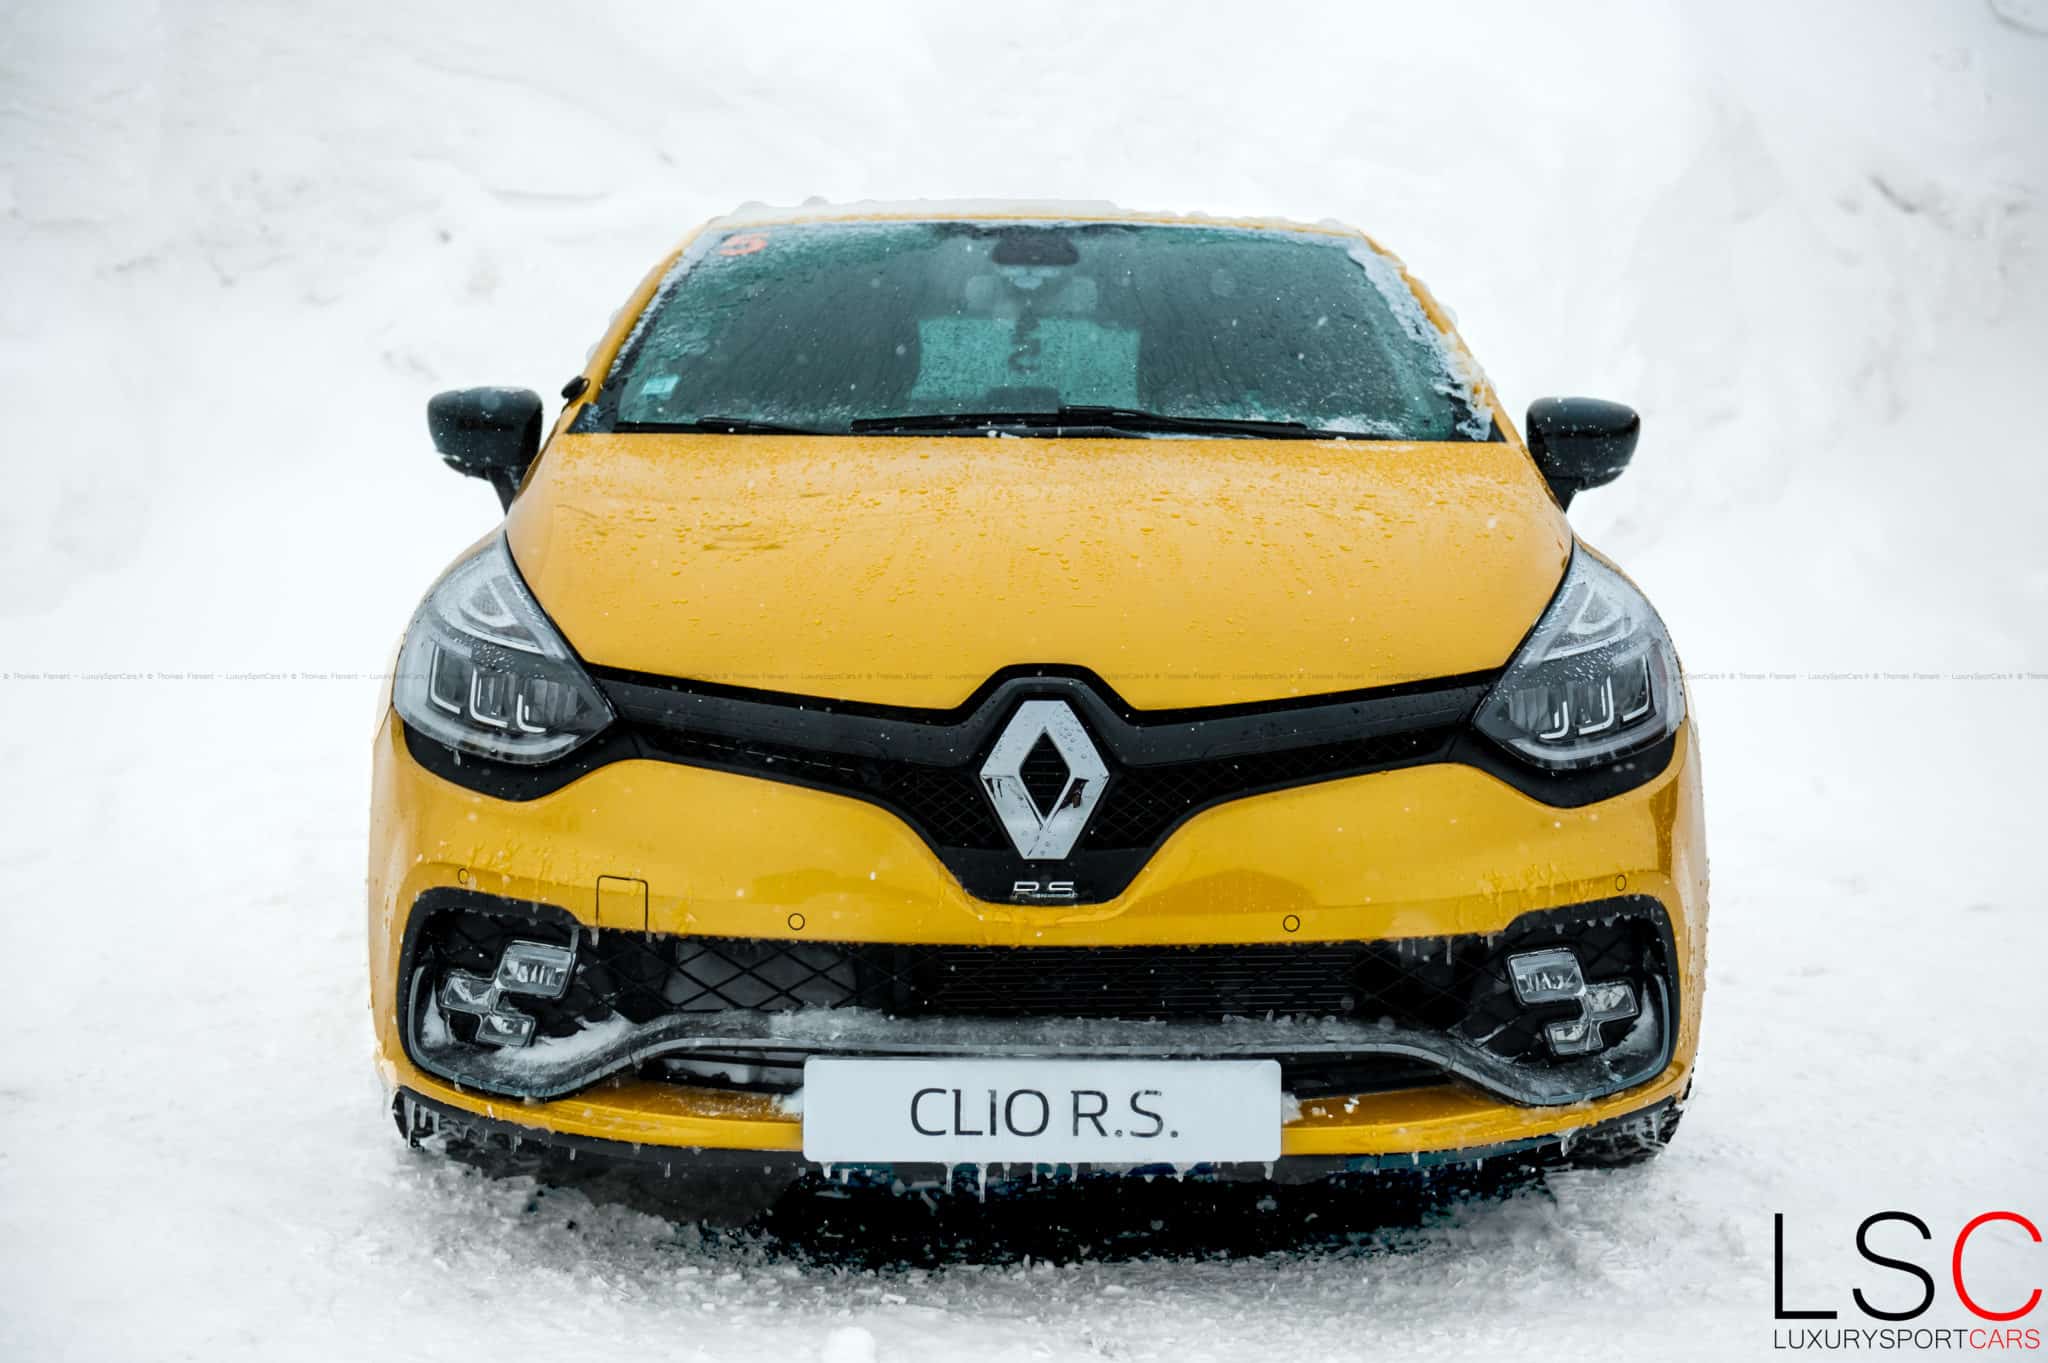 Renault Clio RS Ice Driving Experience